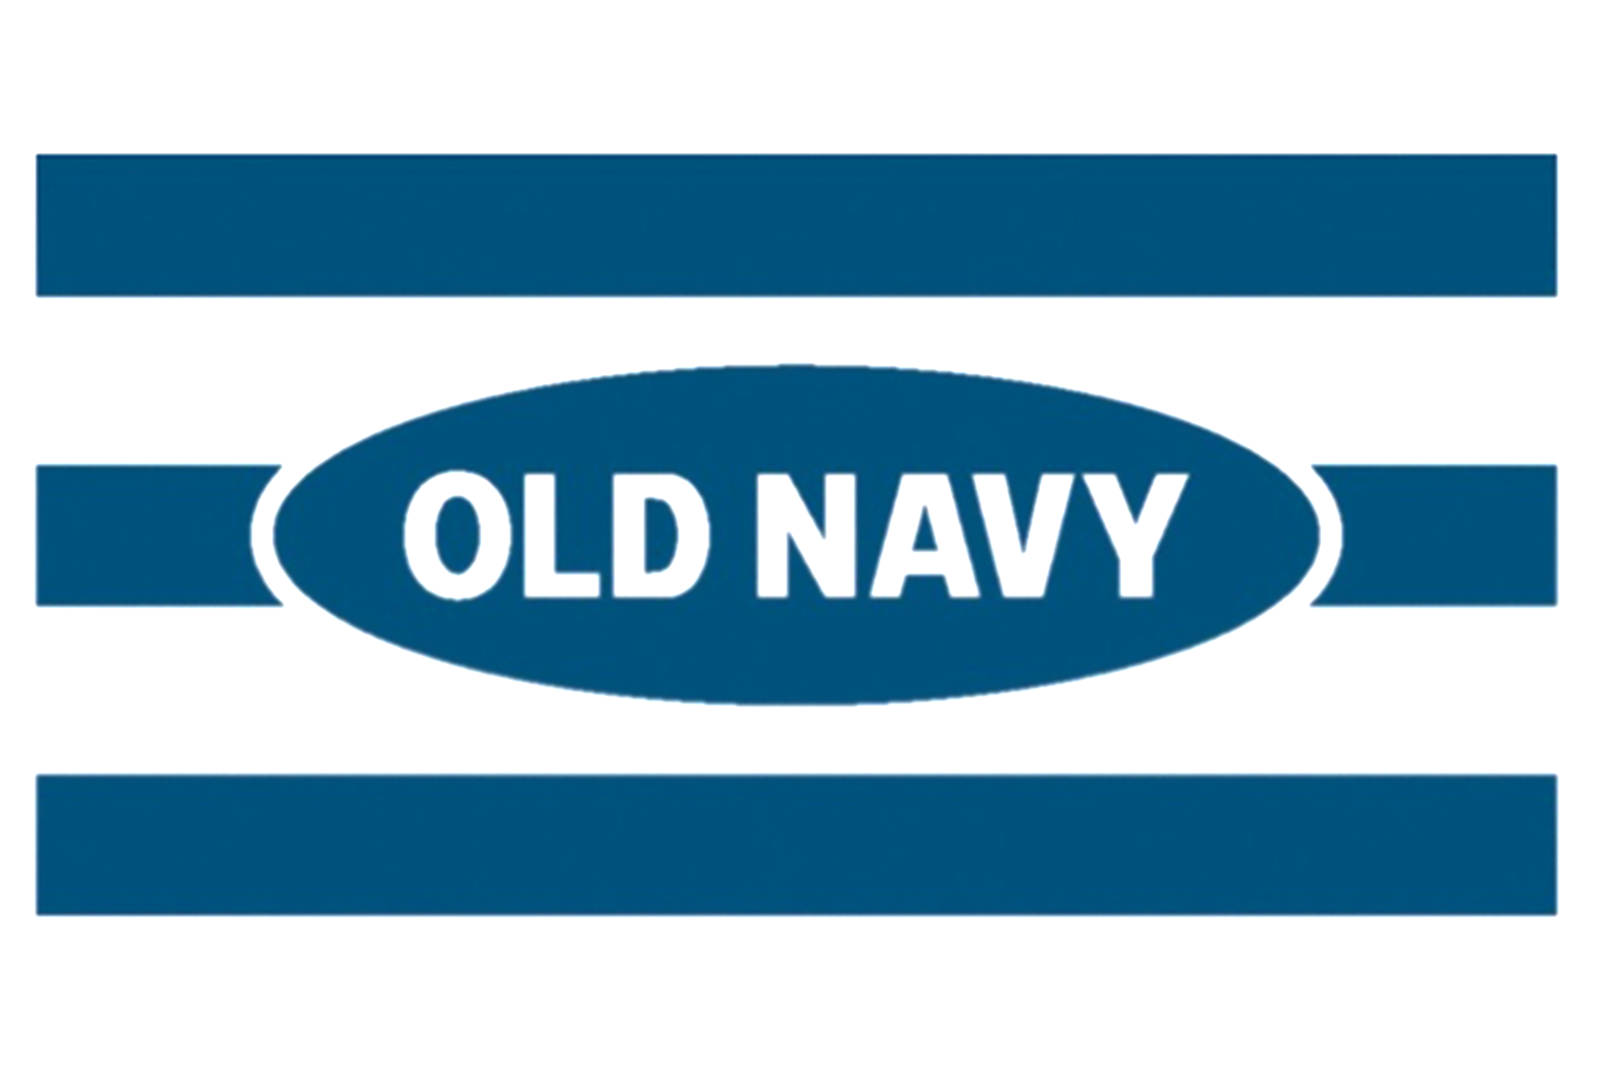 Old Navy Striped Gift Card Background